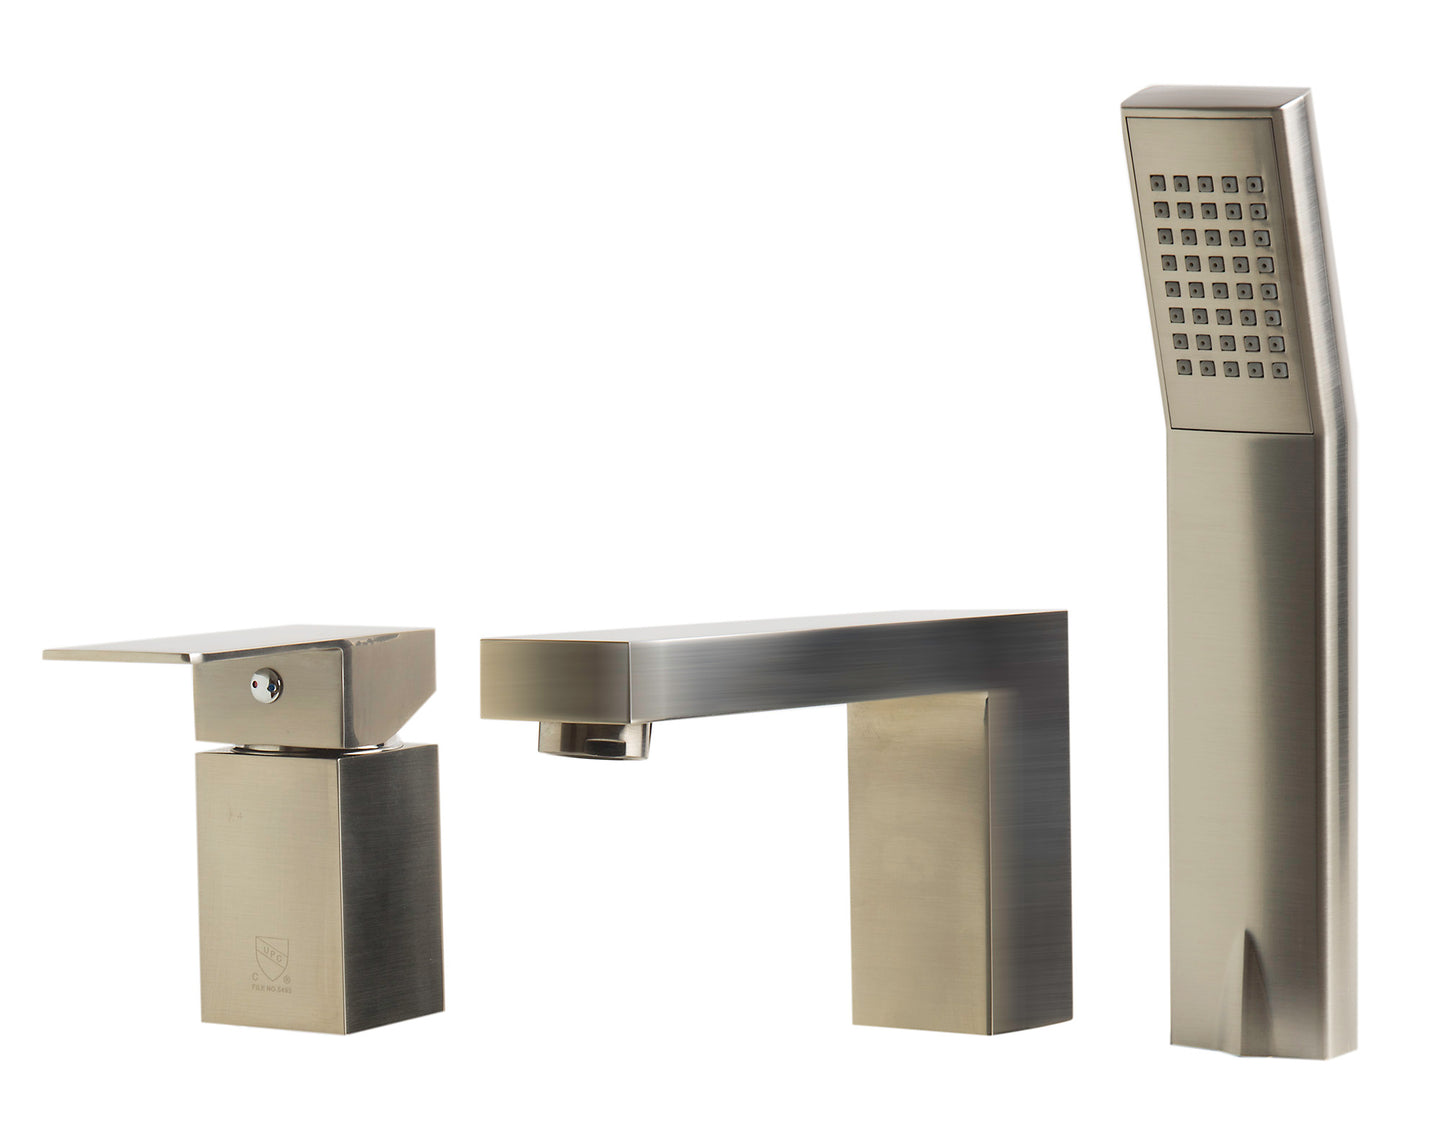 ALFI brand AB2322-BN Brushed Nickel Deck Mounted Tub Filler and Square Hand Held Shower Head